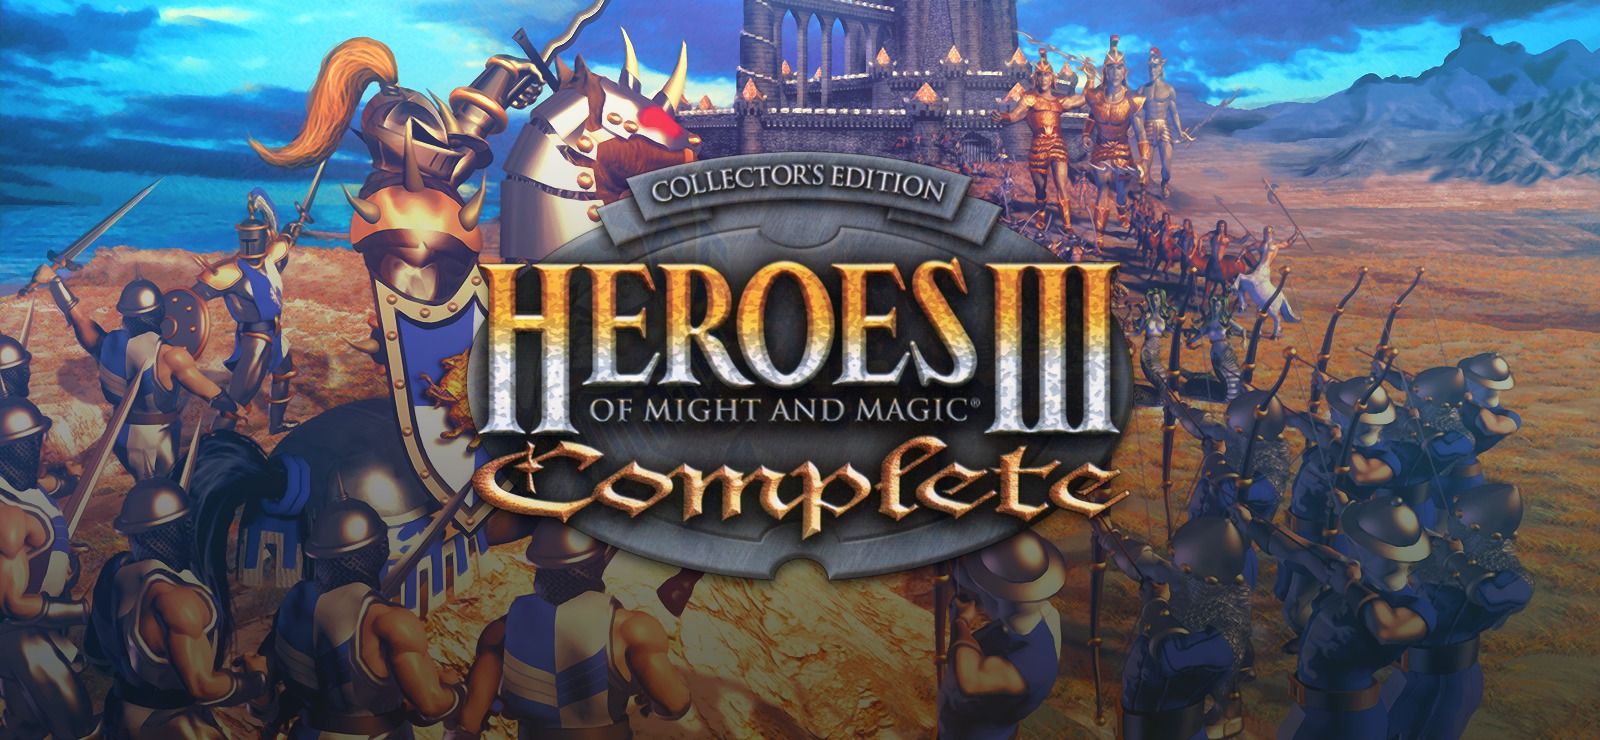 Heroes of Might and Magic III (3) Complete Edition (v 4 0) [GOG] + Horn of The Abyss (v 5 2 R52) (HoTA) + HD + Multiplayer [Win